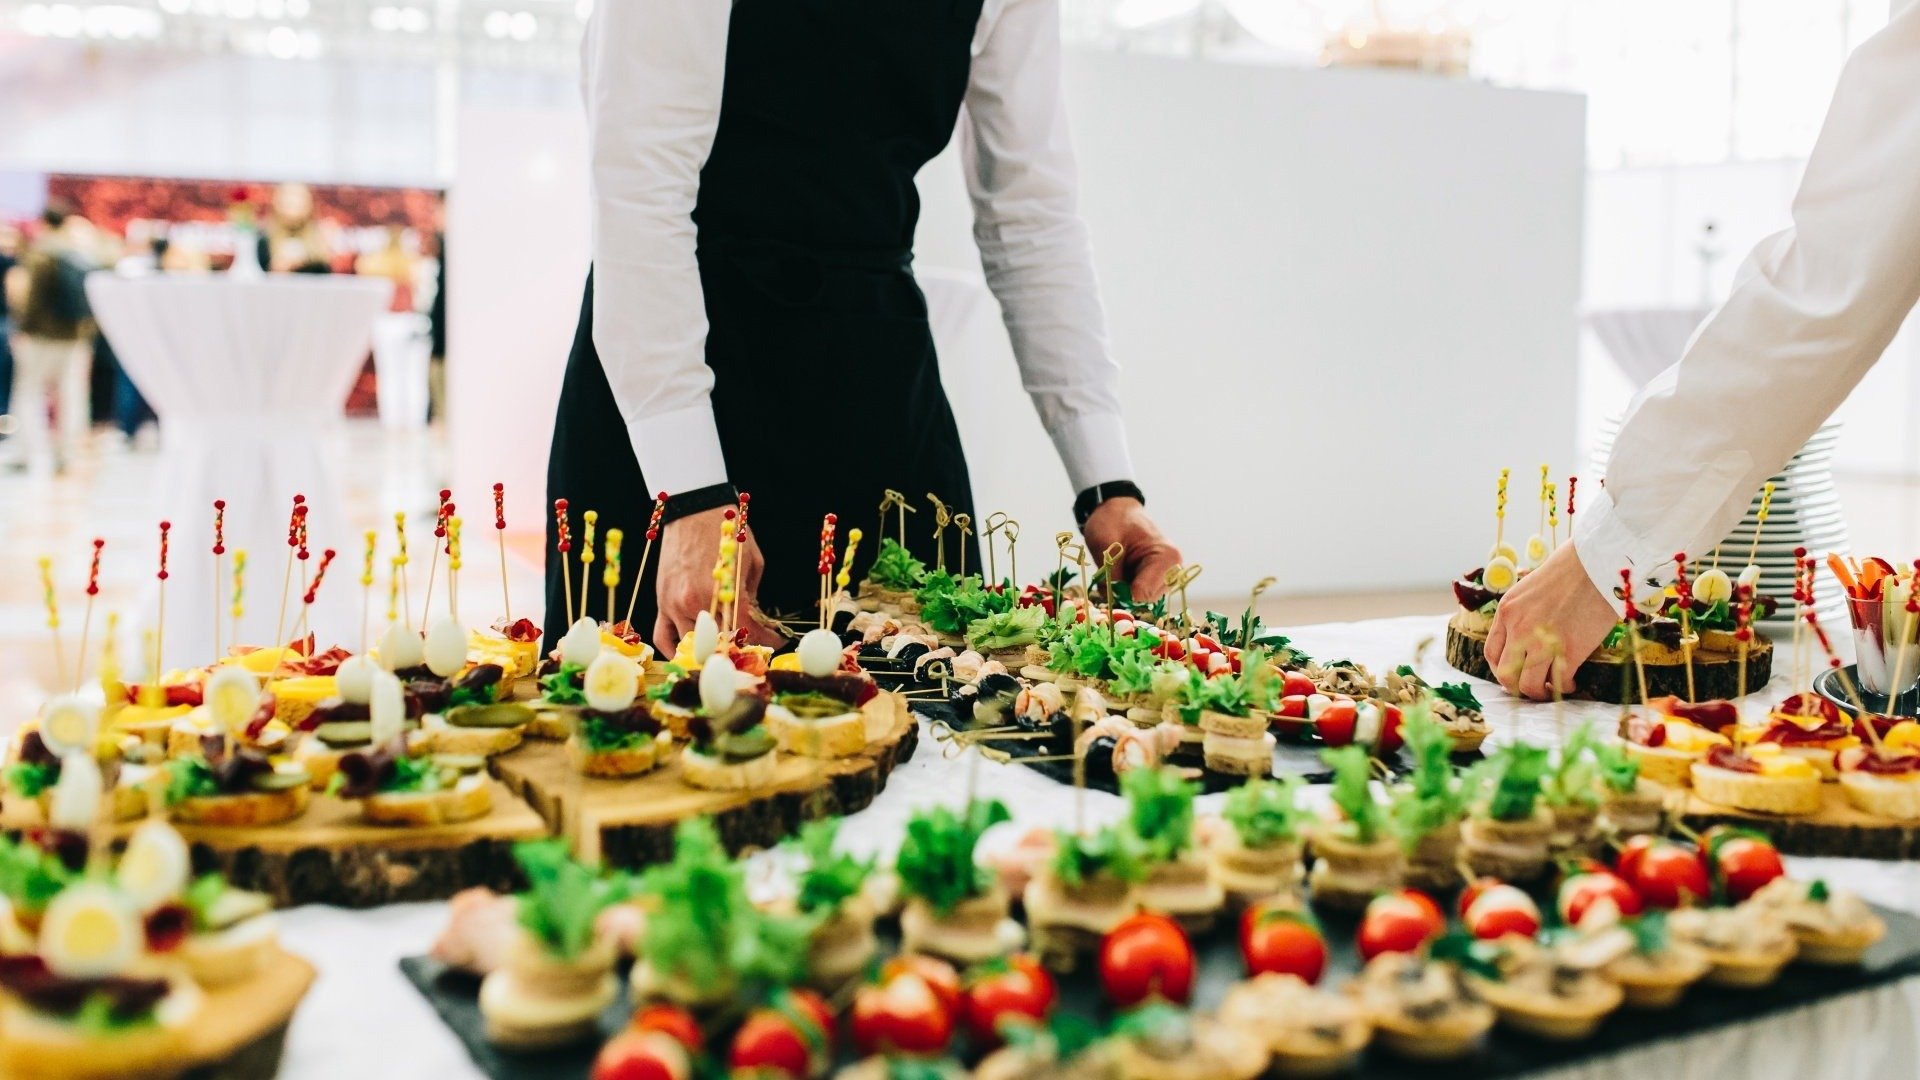 Creative catering ideas – from “Game of Thrones” to retro buffets